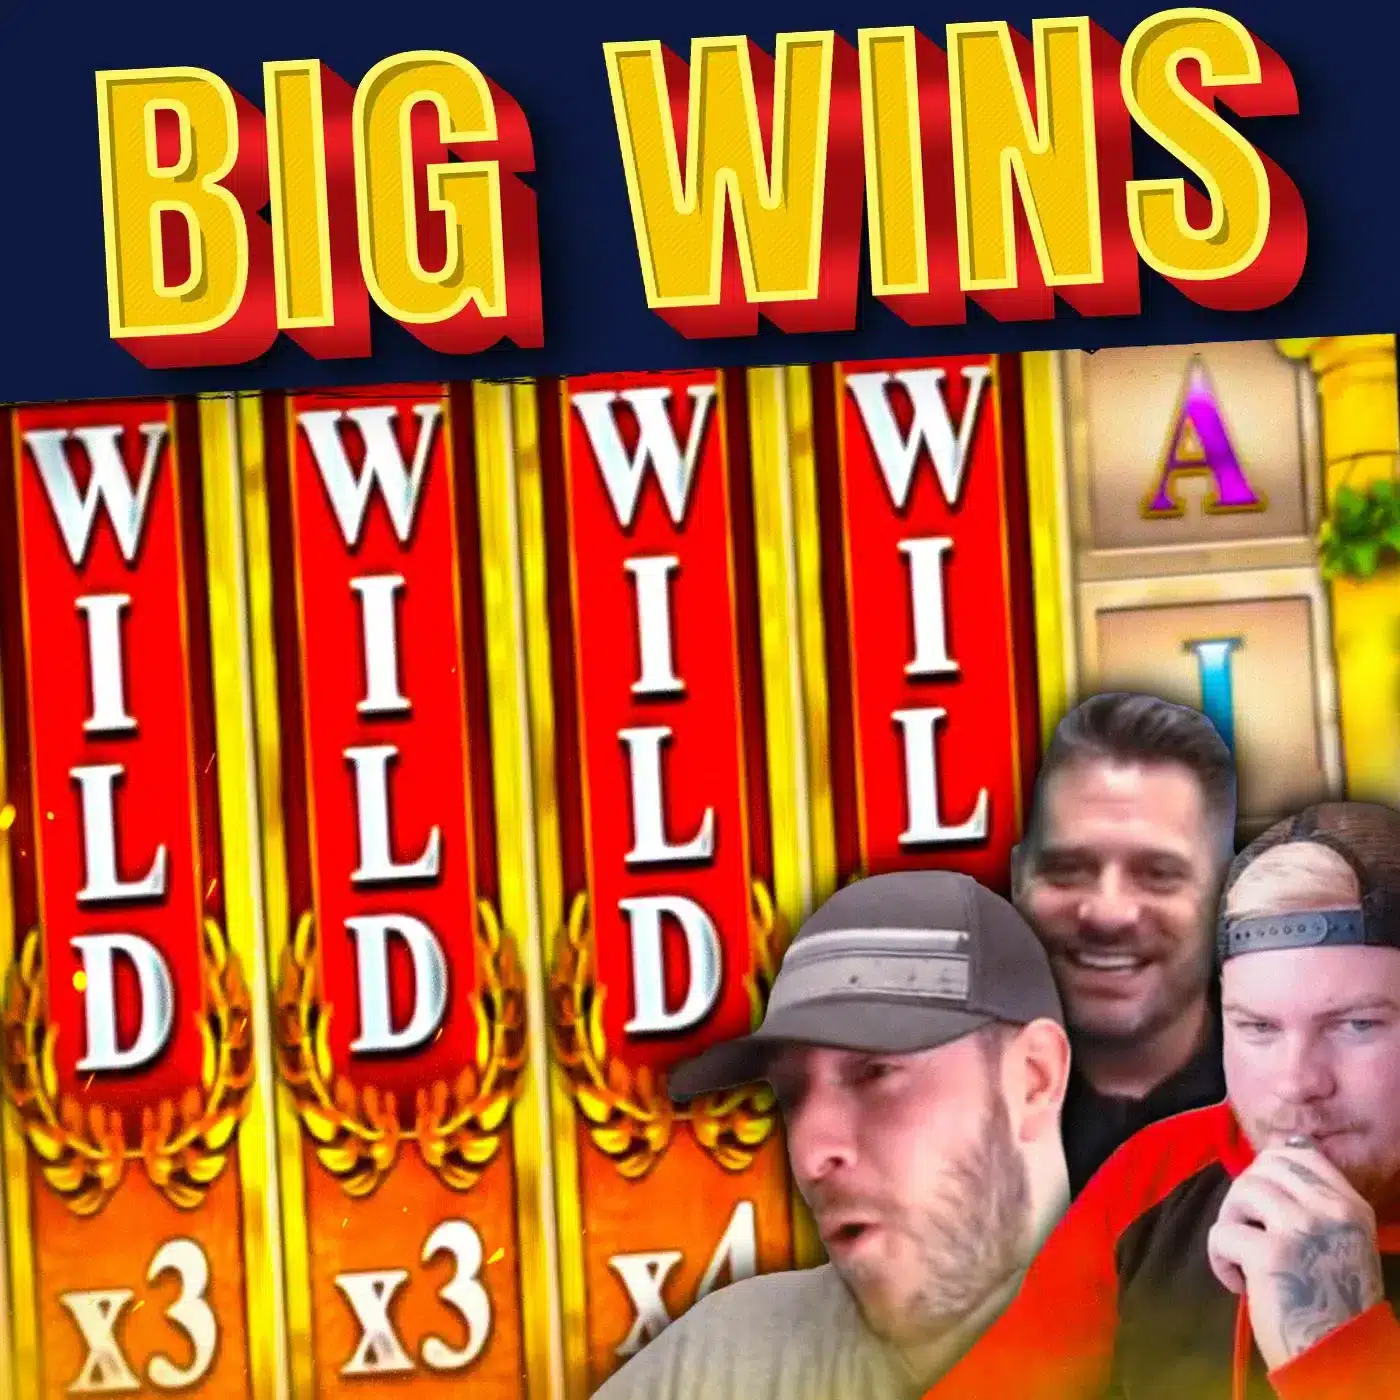 Weekly Biggest Wins! Featuring Epic Wild Swarm Action! Visit Fruityslots.com For Best Slot Sites UK!